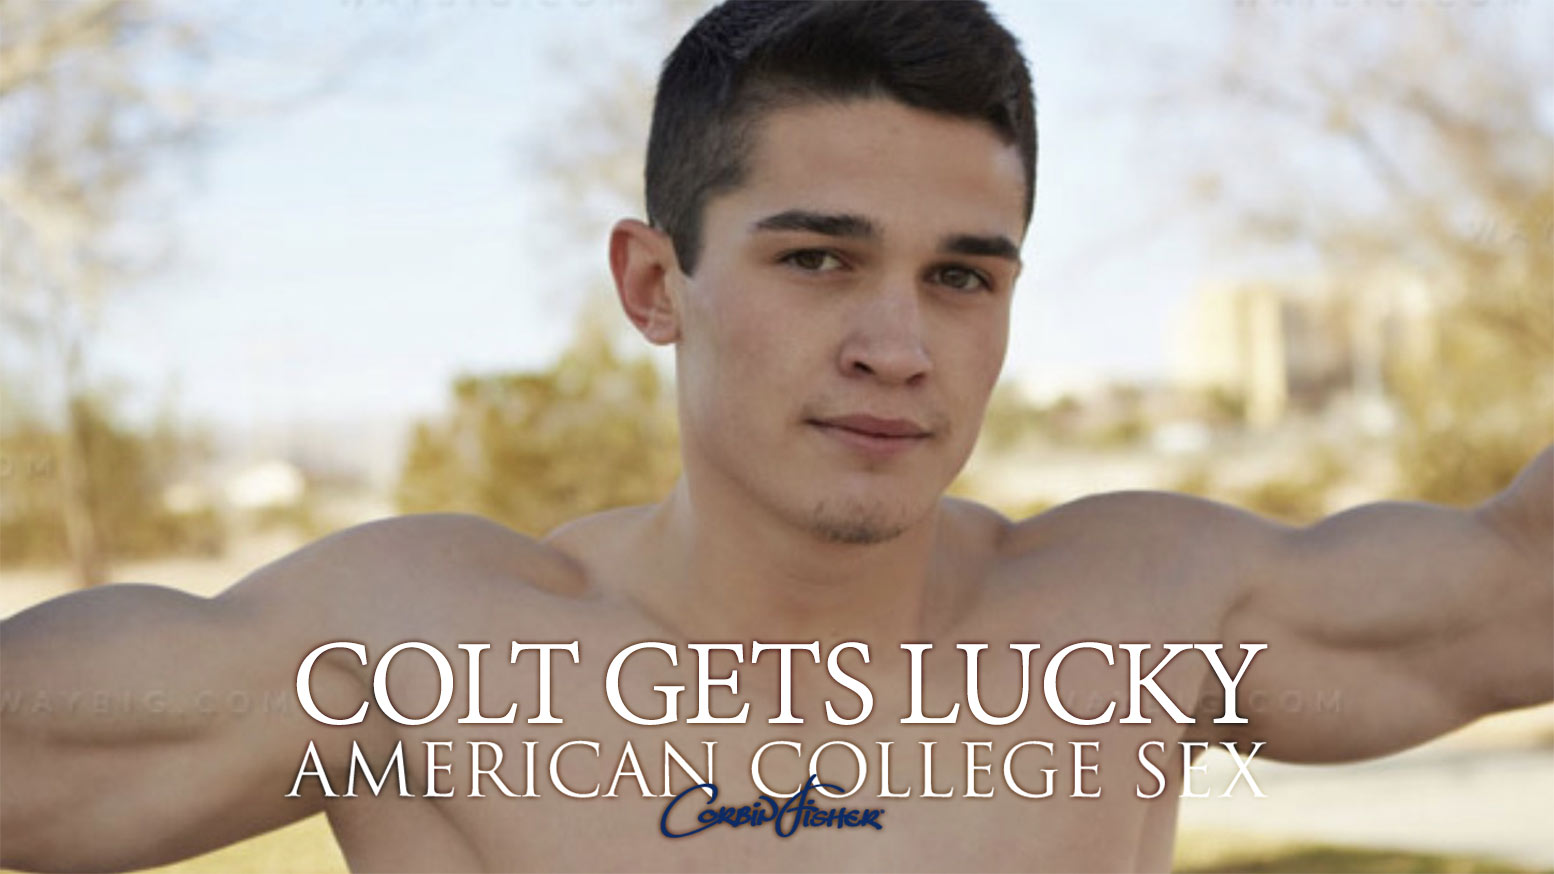 American College Sex Colt Gets Lucky